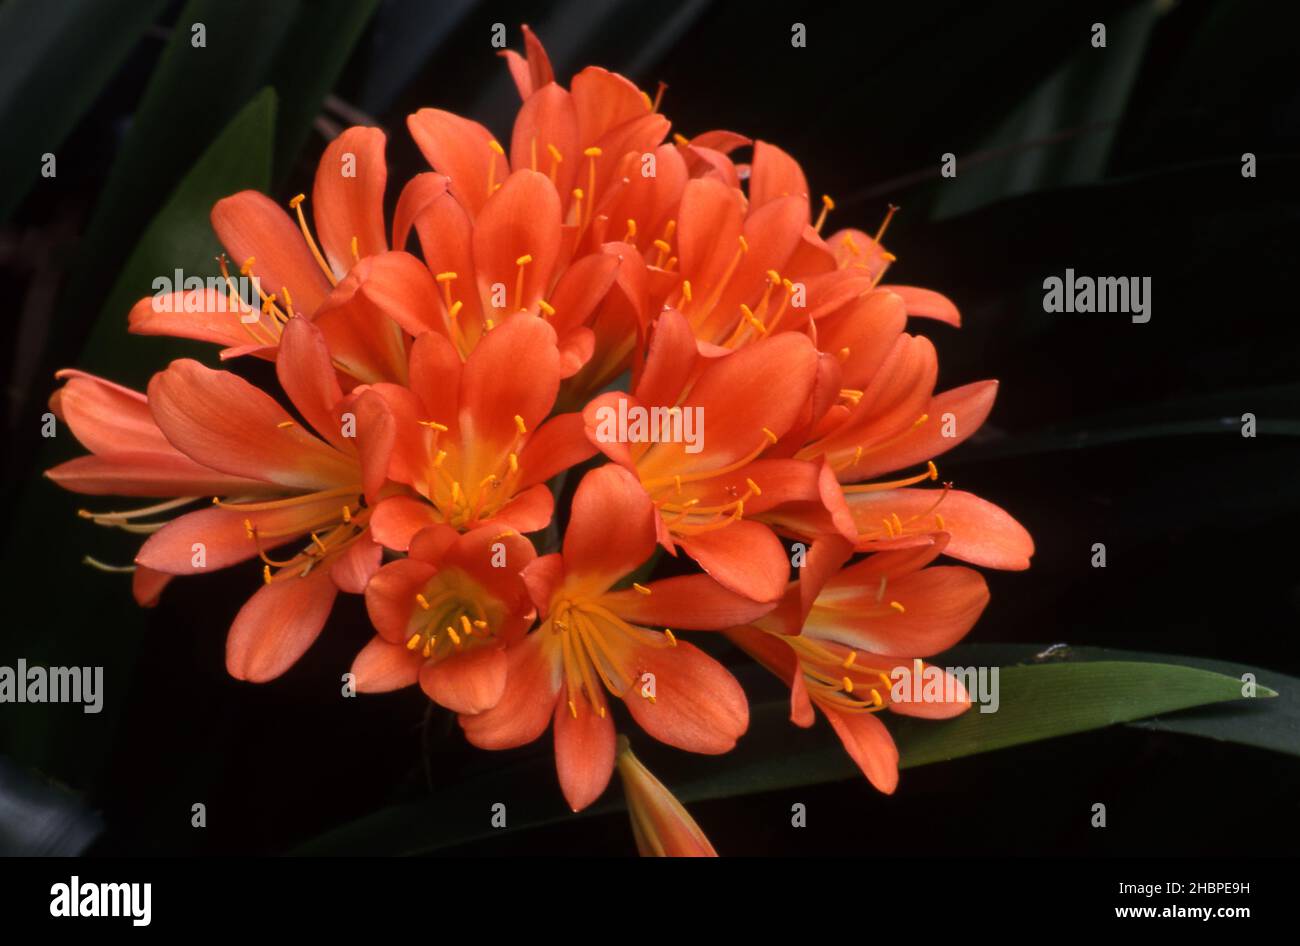 ORANGE CLIVIA FLOWER, COMMONLY KNOWN AS KAFFIR LILY, NATAL LILY OR BUSH LILY. Stock Photo